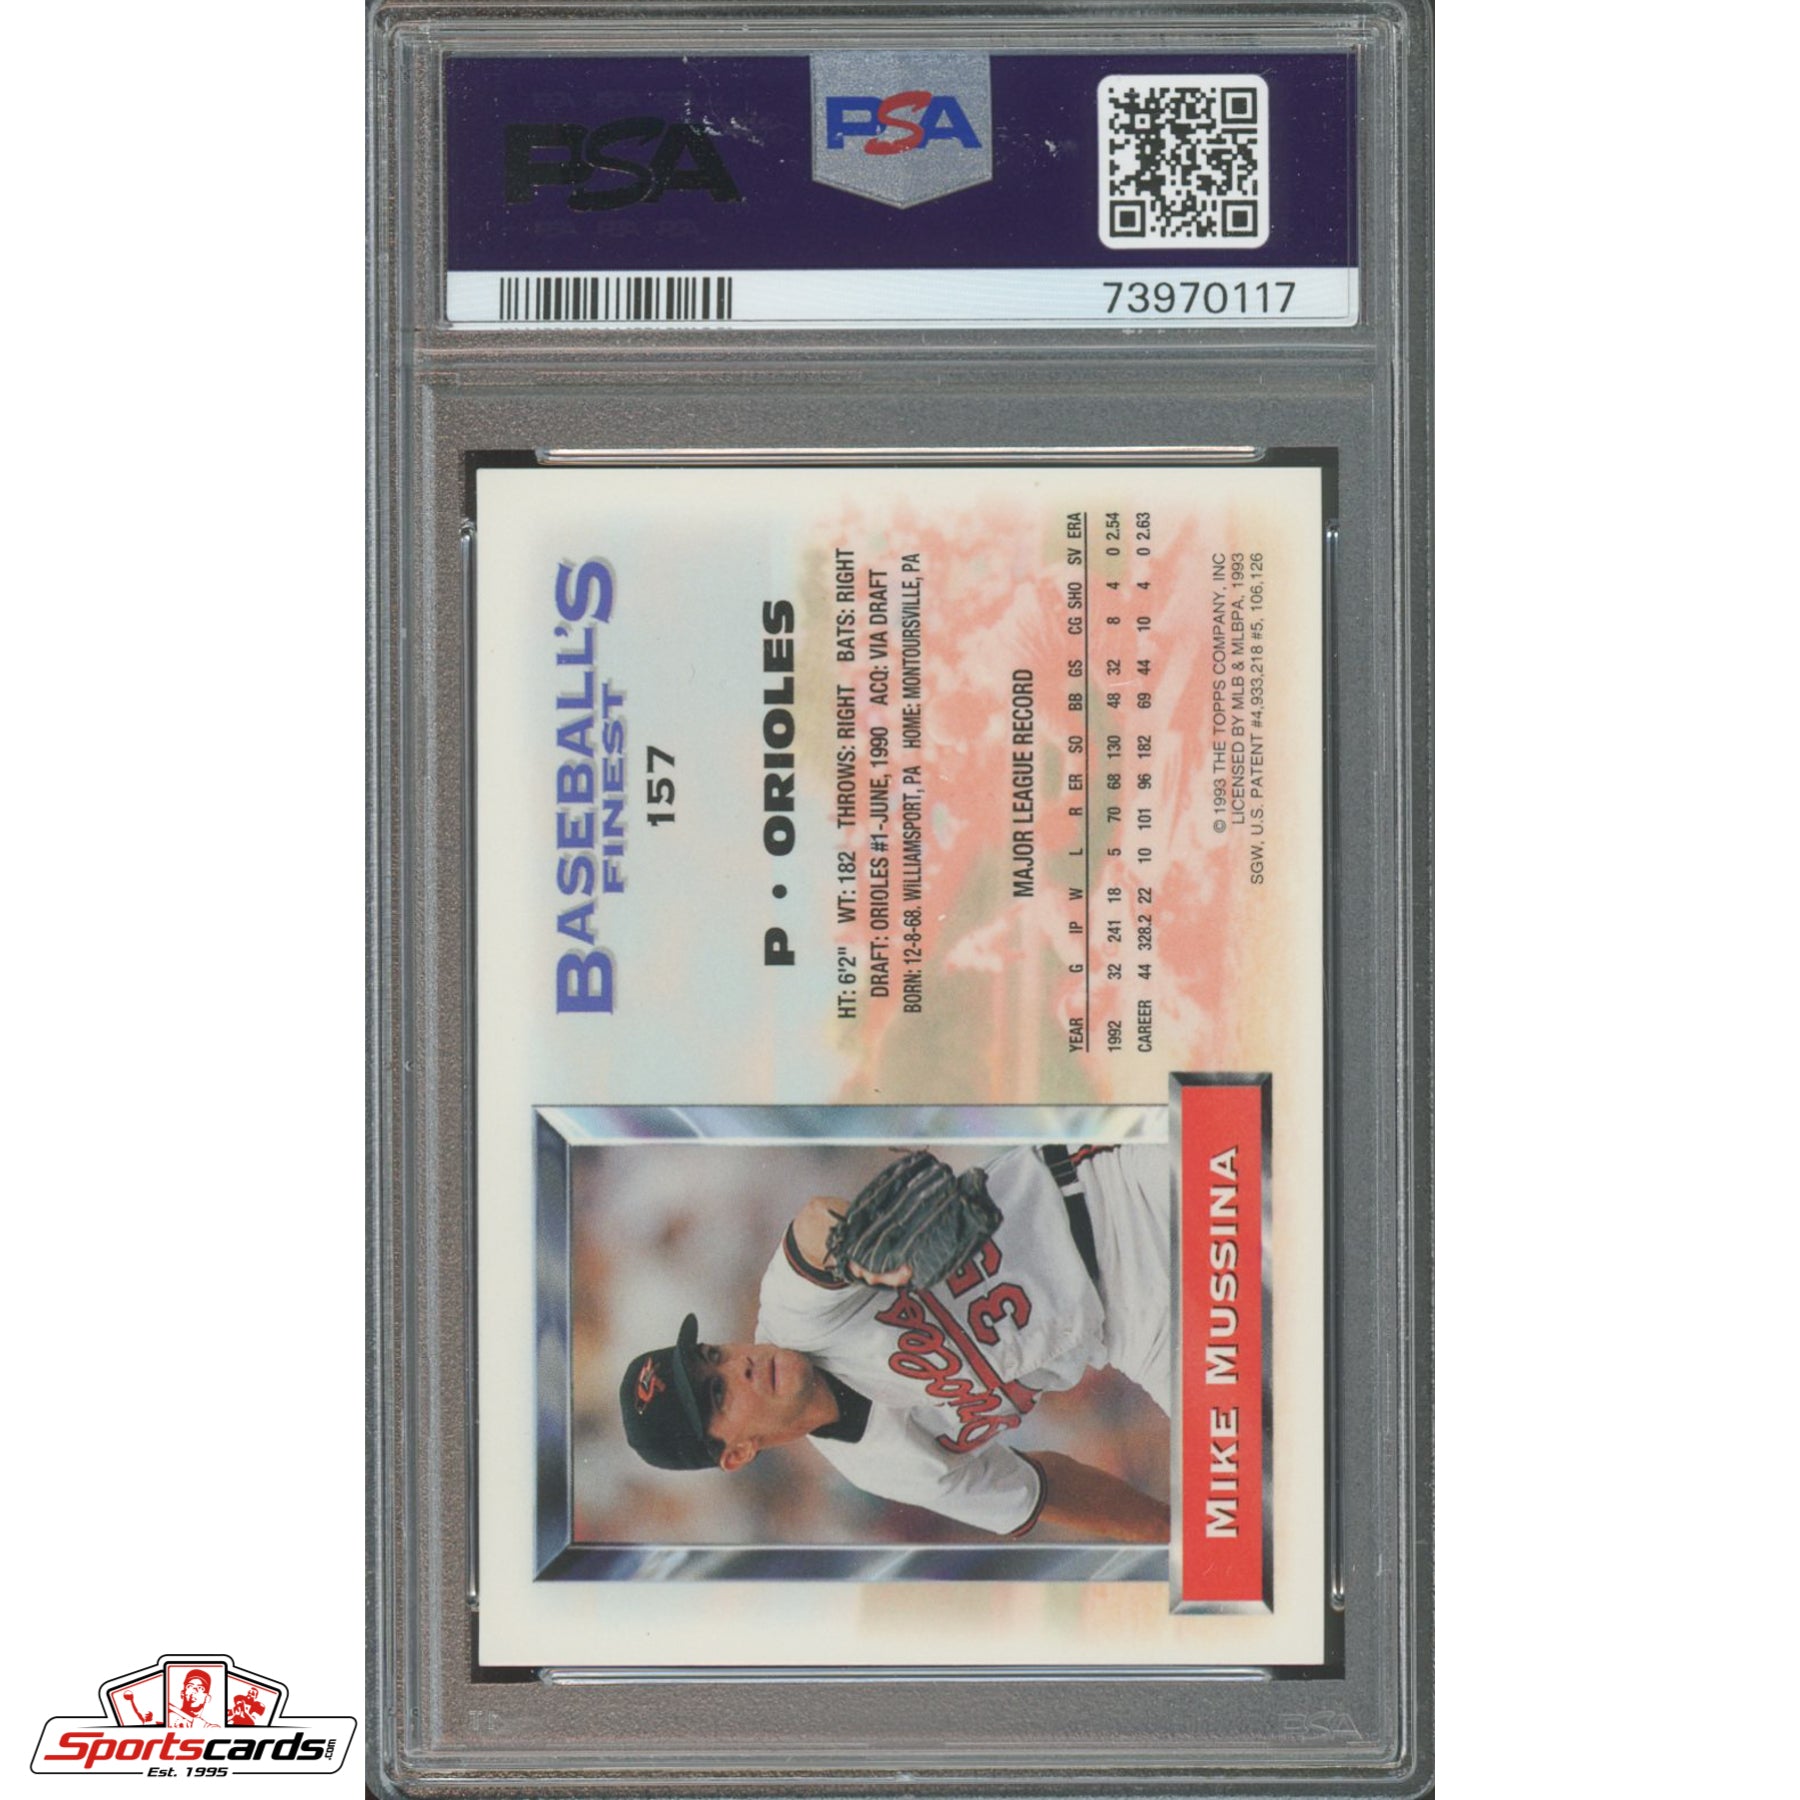 1993 Finest Mike Mussina Refractor #157 PSA 9